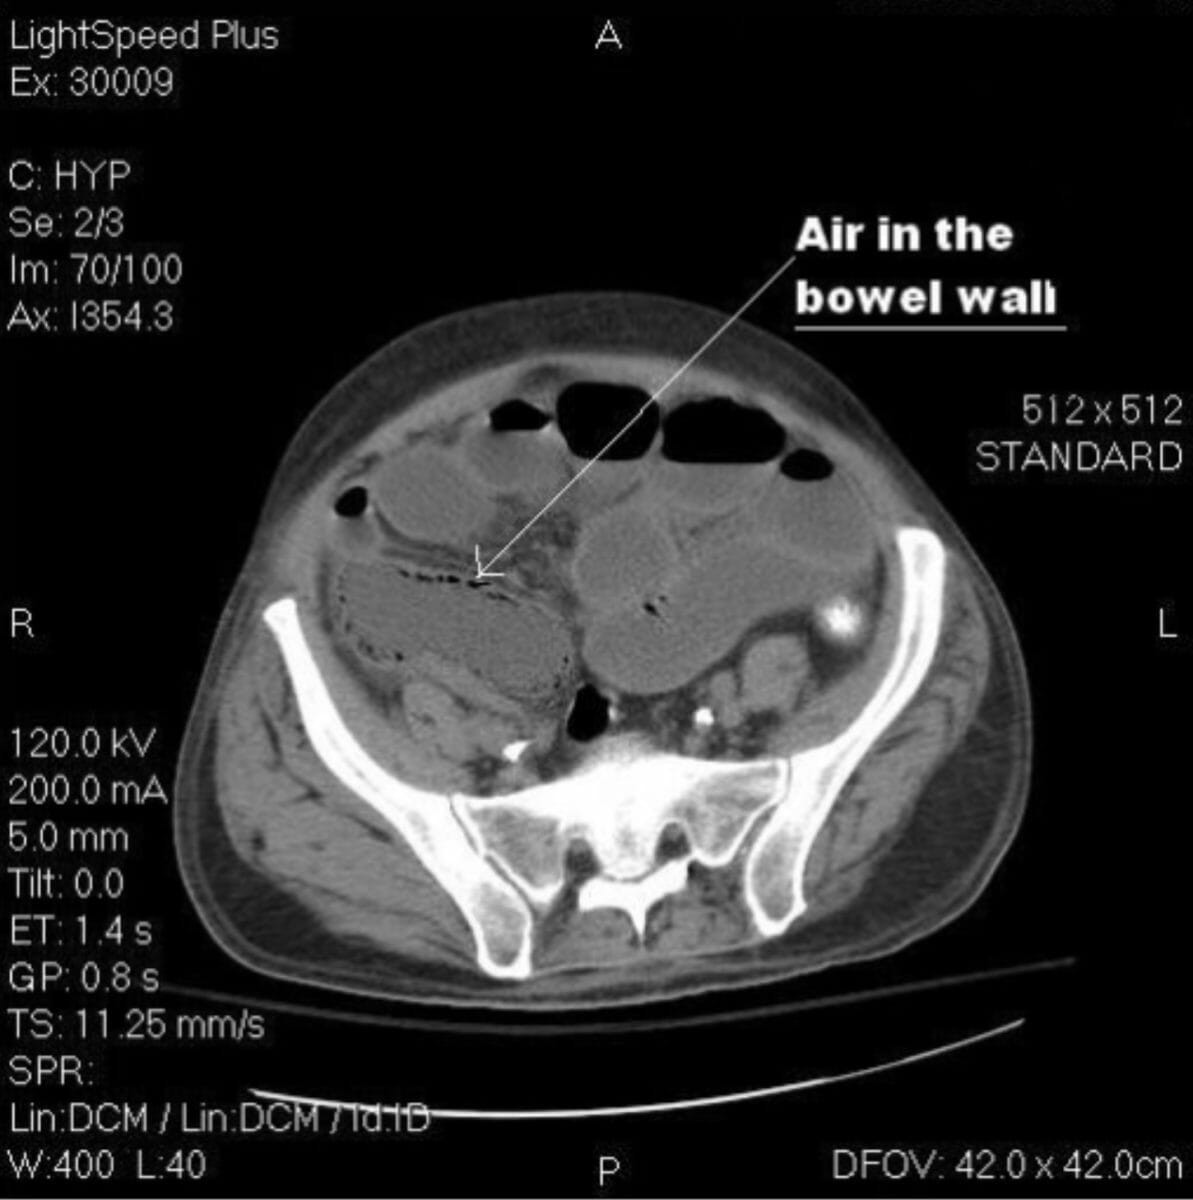 Non contrast computed tomography of the abdomen and pelvis (axial view) shows air in the bowel wall